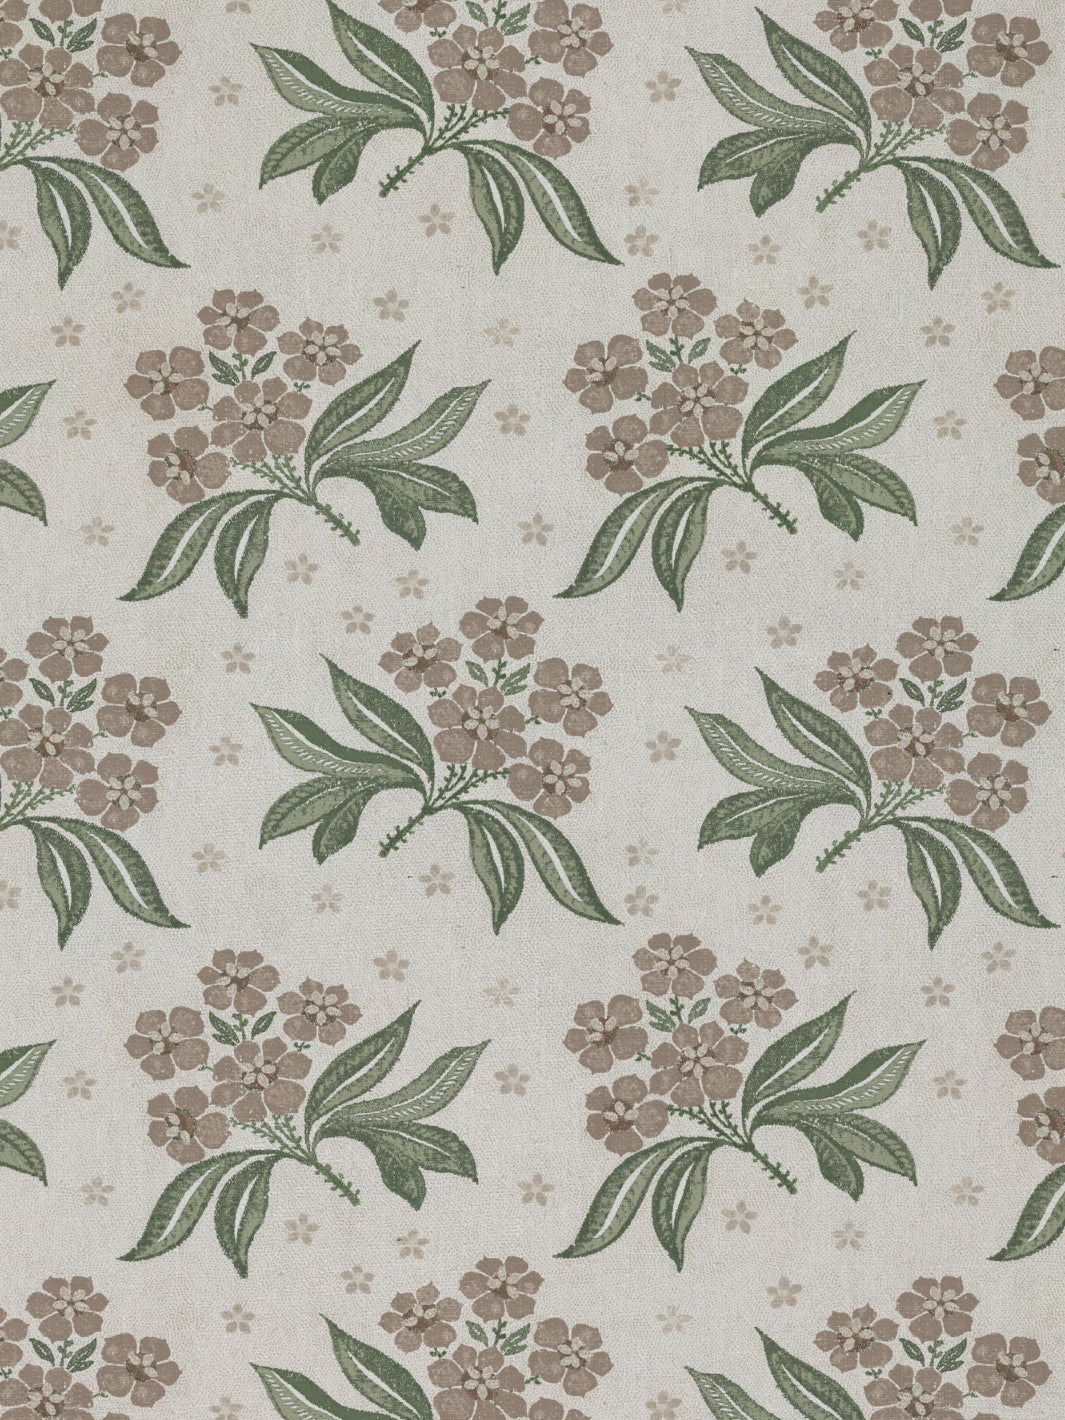 'Marian' Linen Fabric by Nathan Turner - Taupe Green